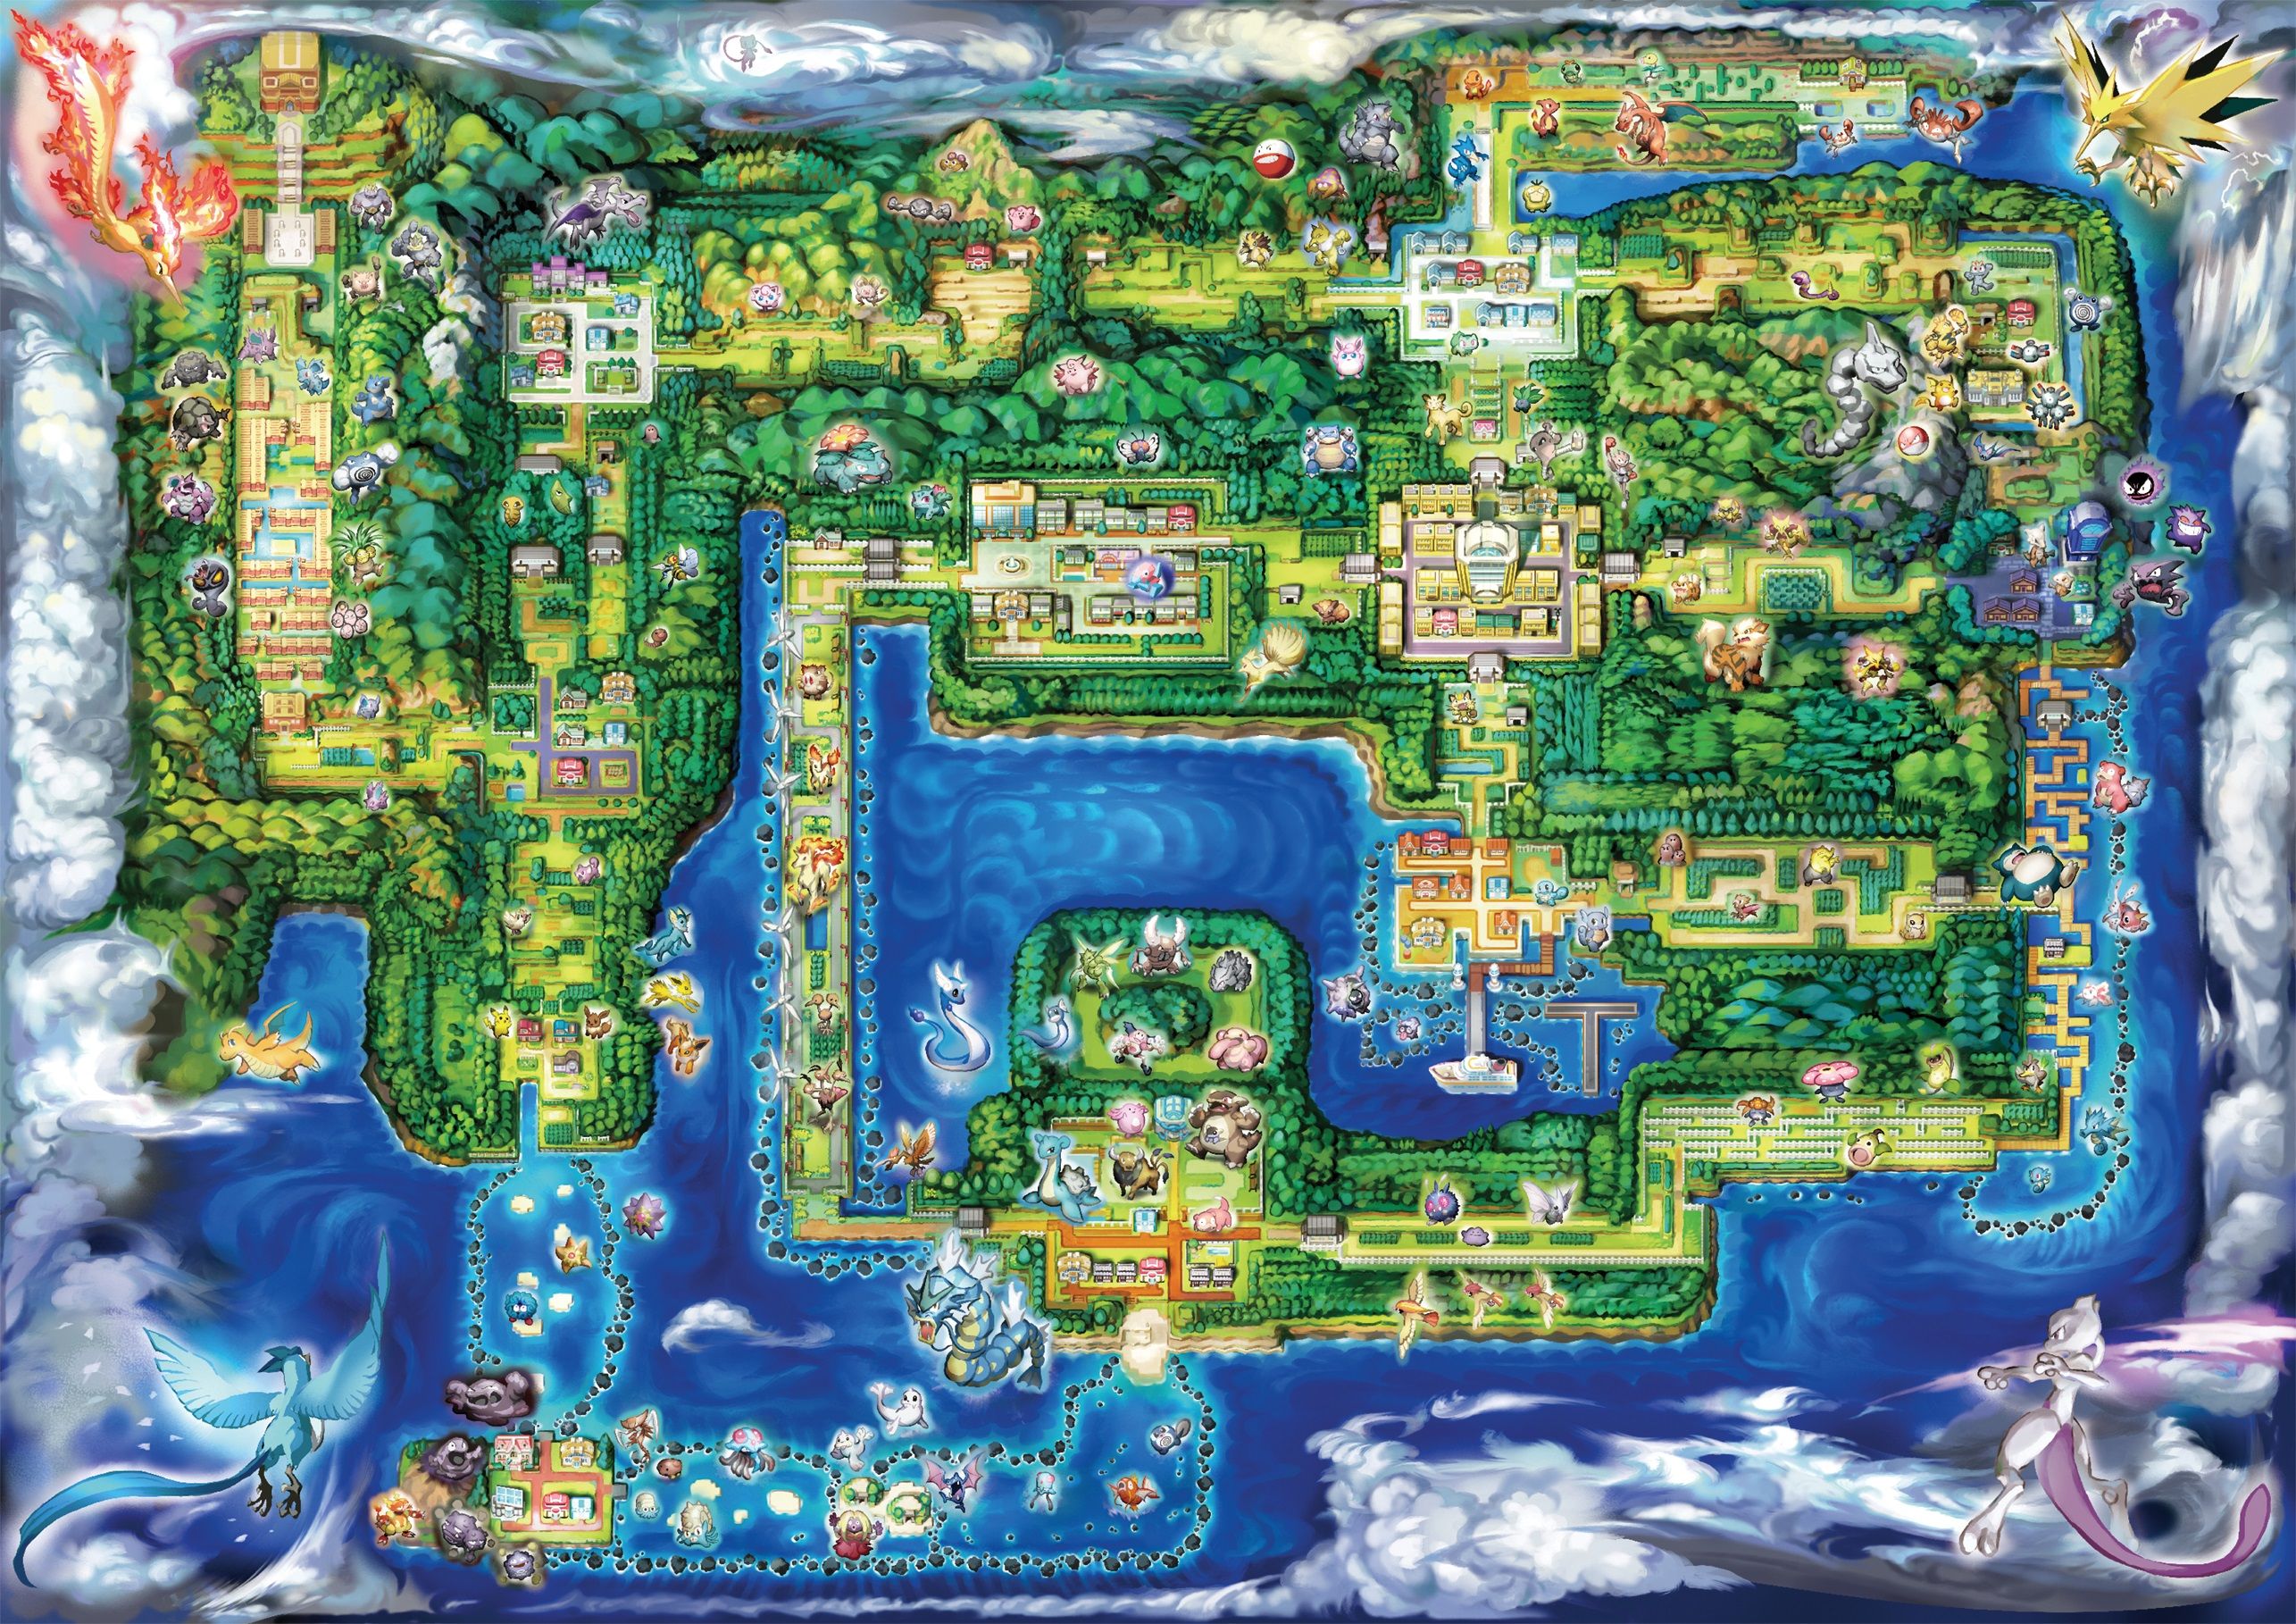 Detailed Map Of Kanto Revealed In Latest Lets Go Pikachu Trailer Hints At Starter Pokémon Locations